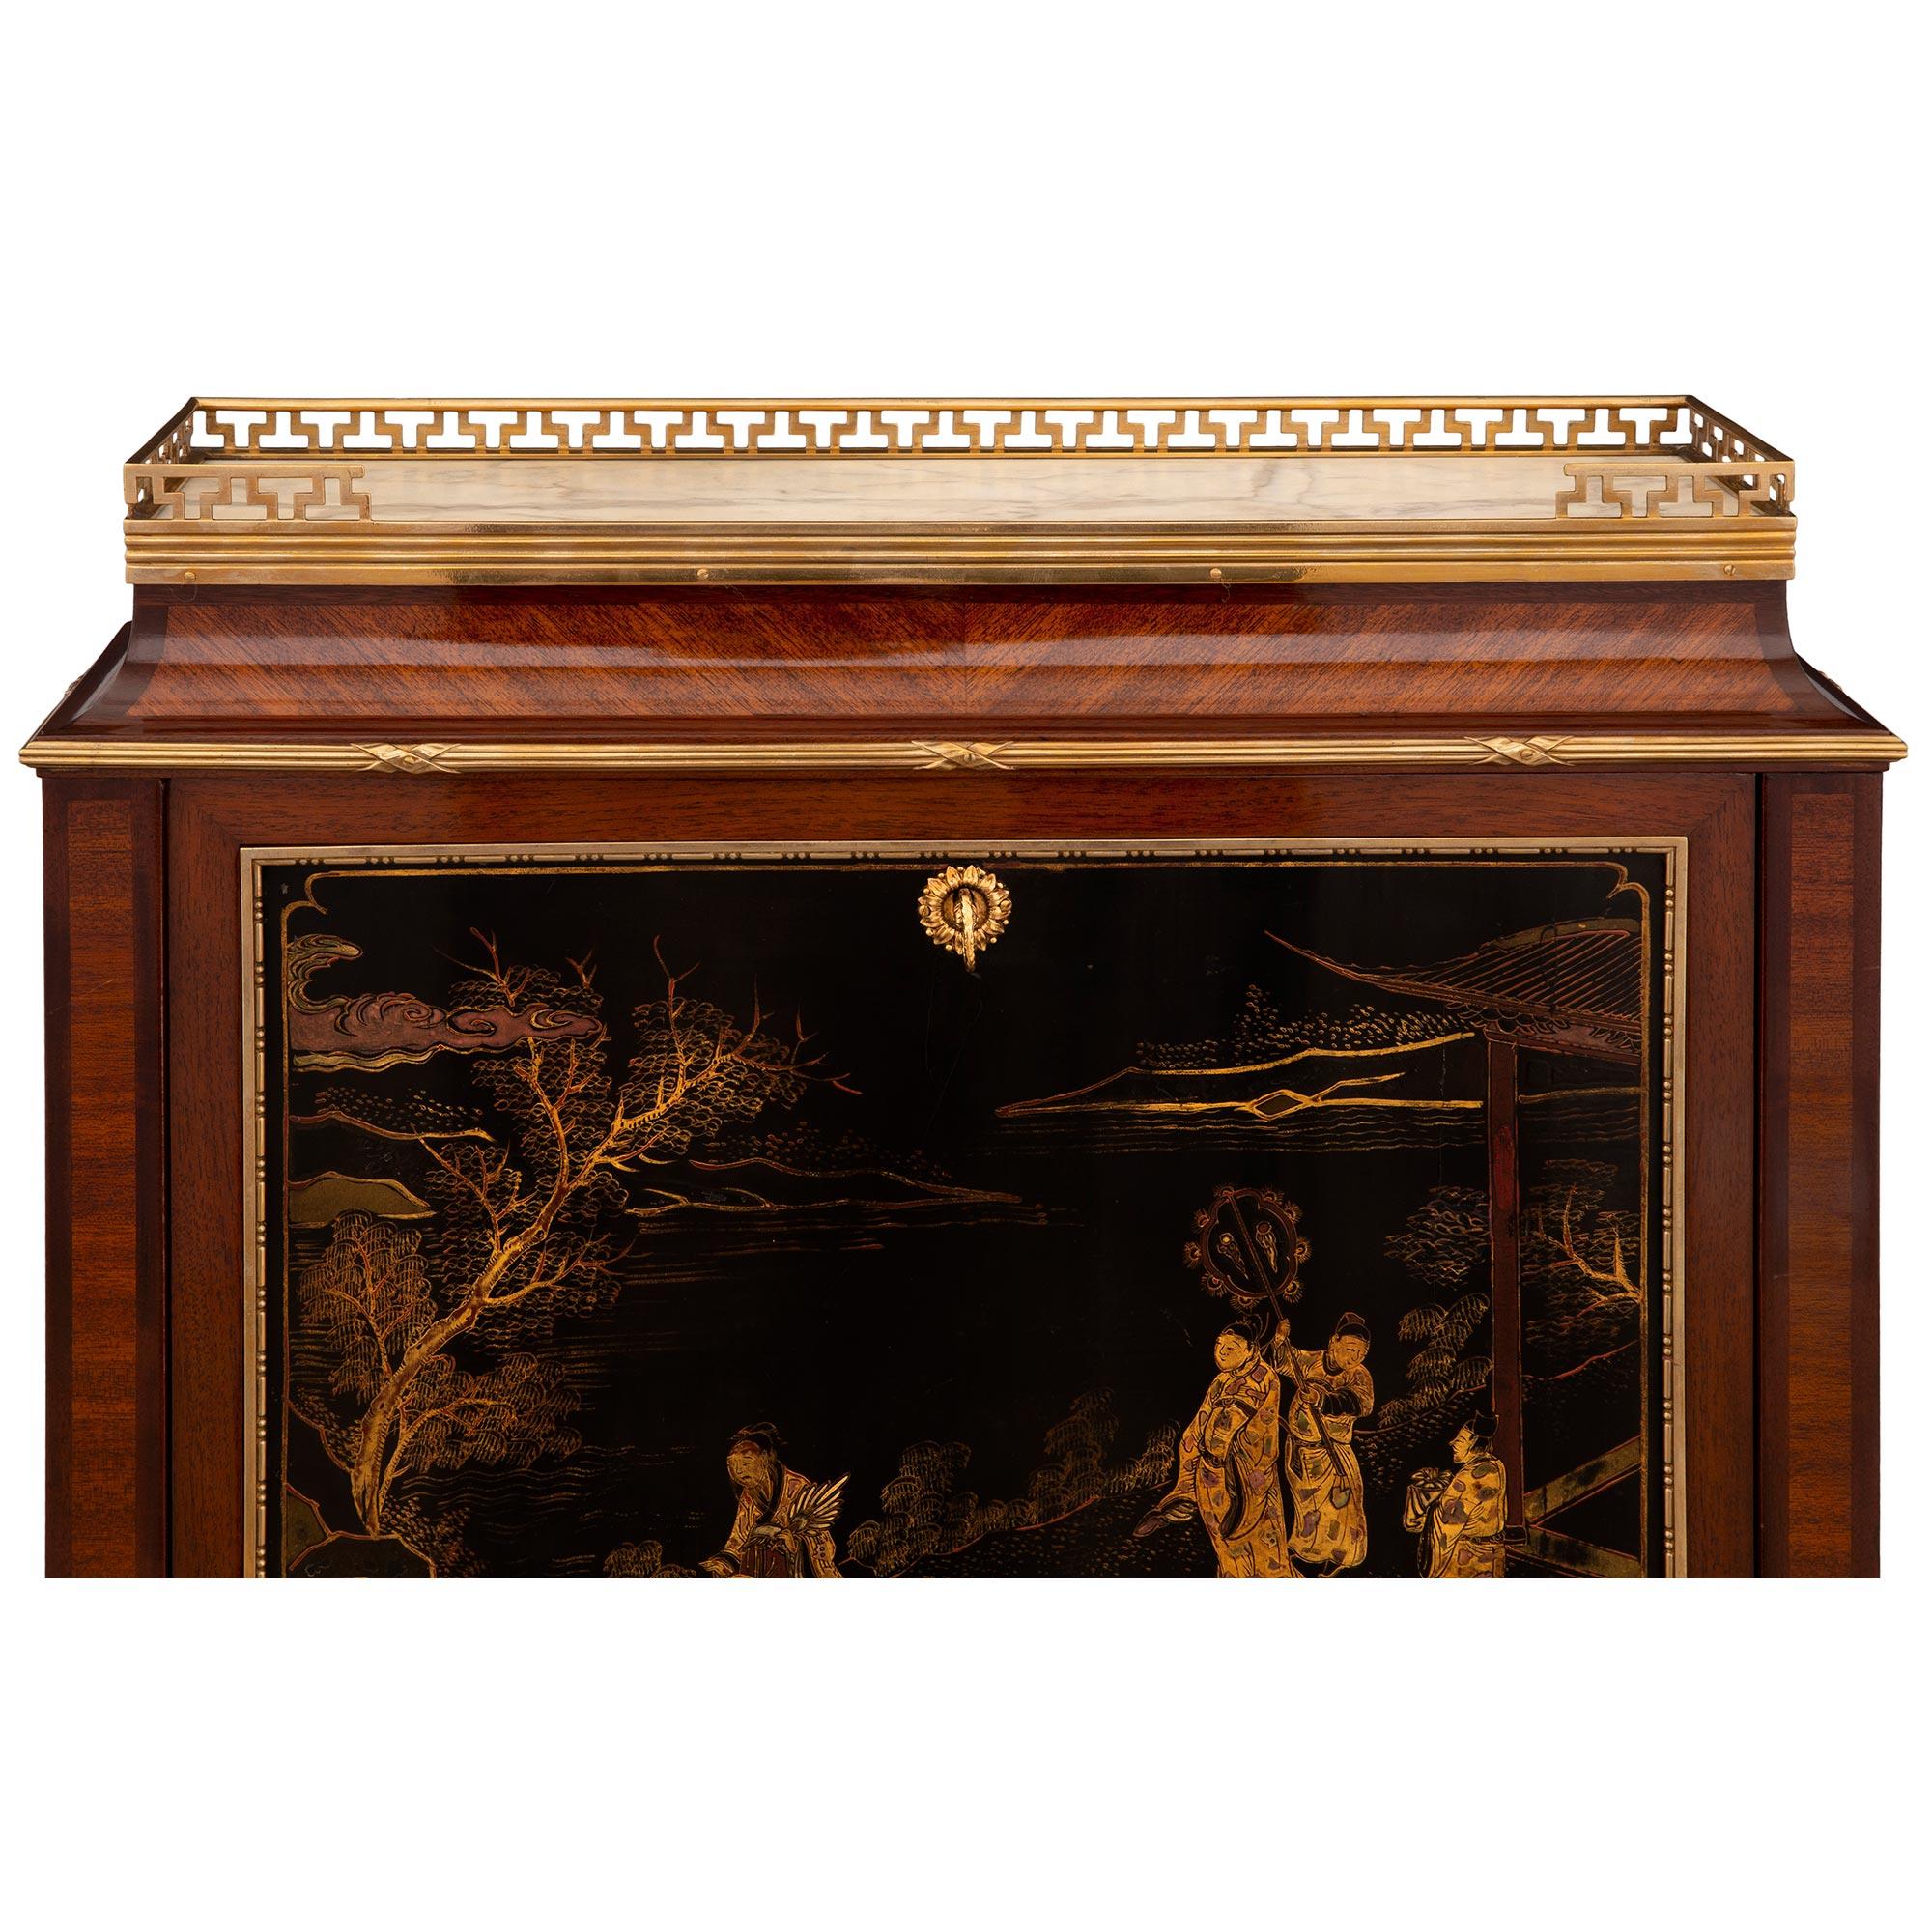 French 19th Century Louis XVI Style Tulipwood Kingwood and Ebony Drop Front Desk For Sale 2